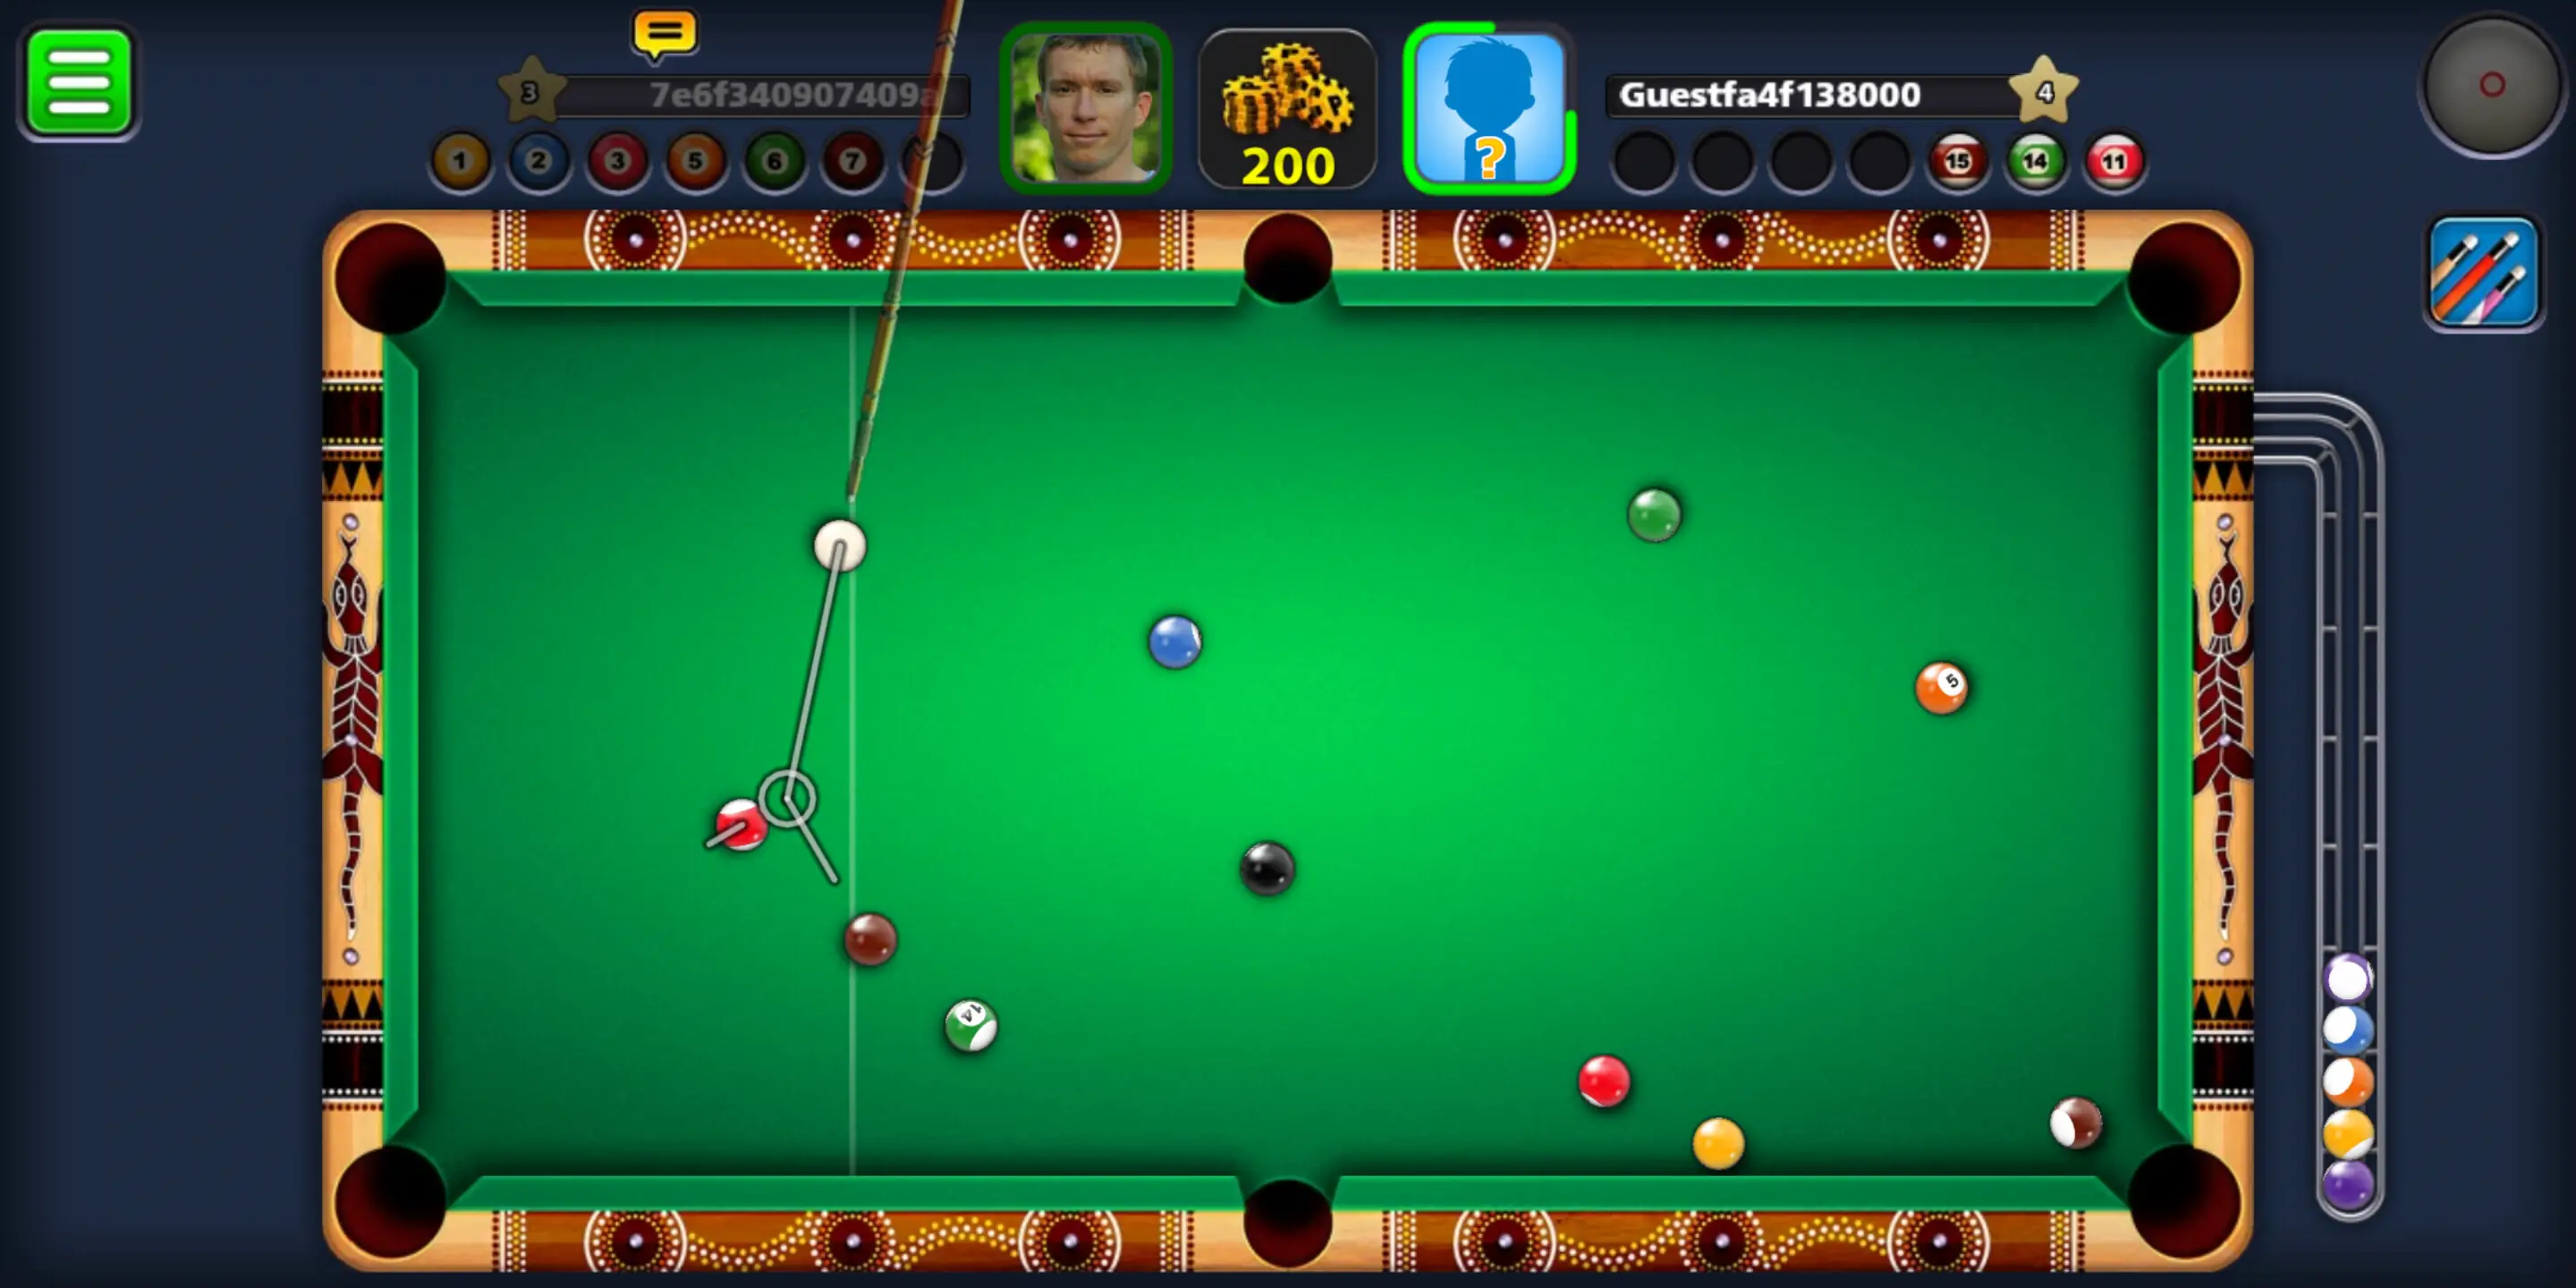 8 Ball Pool review: Head to the pool hall with a casual game of billiards